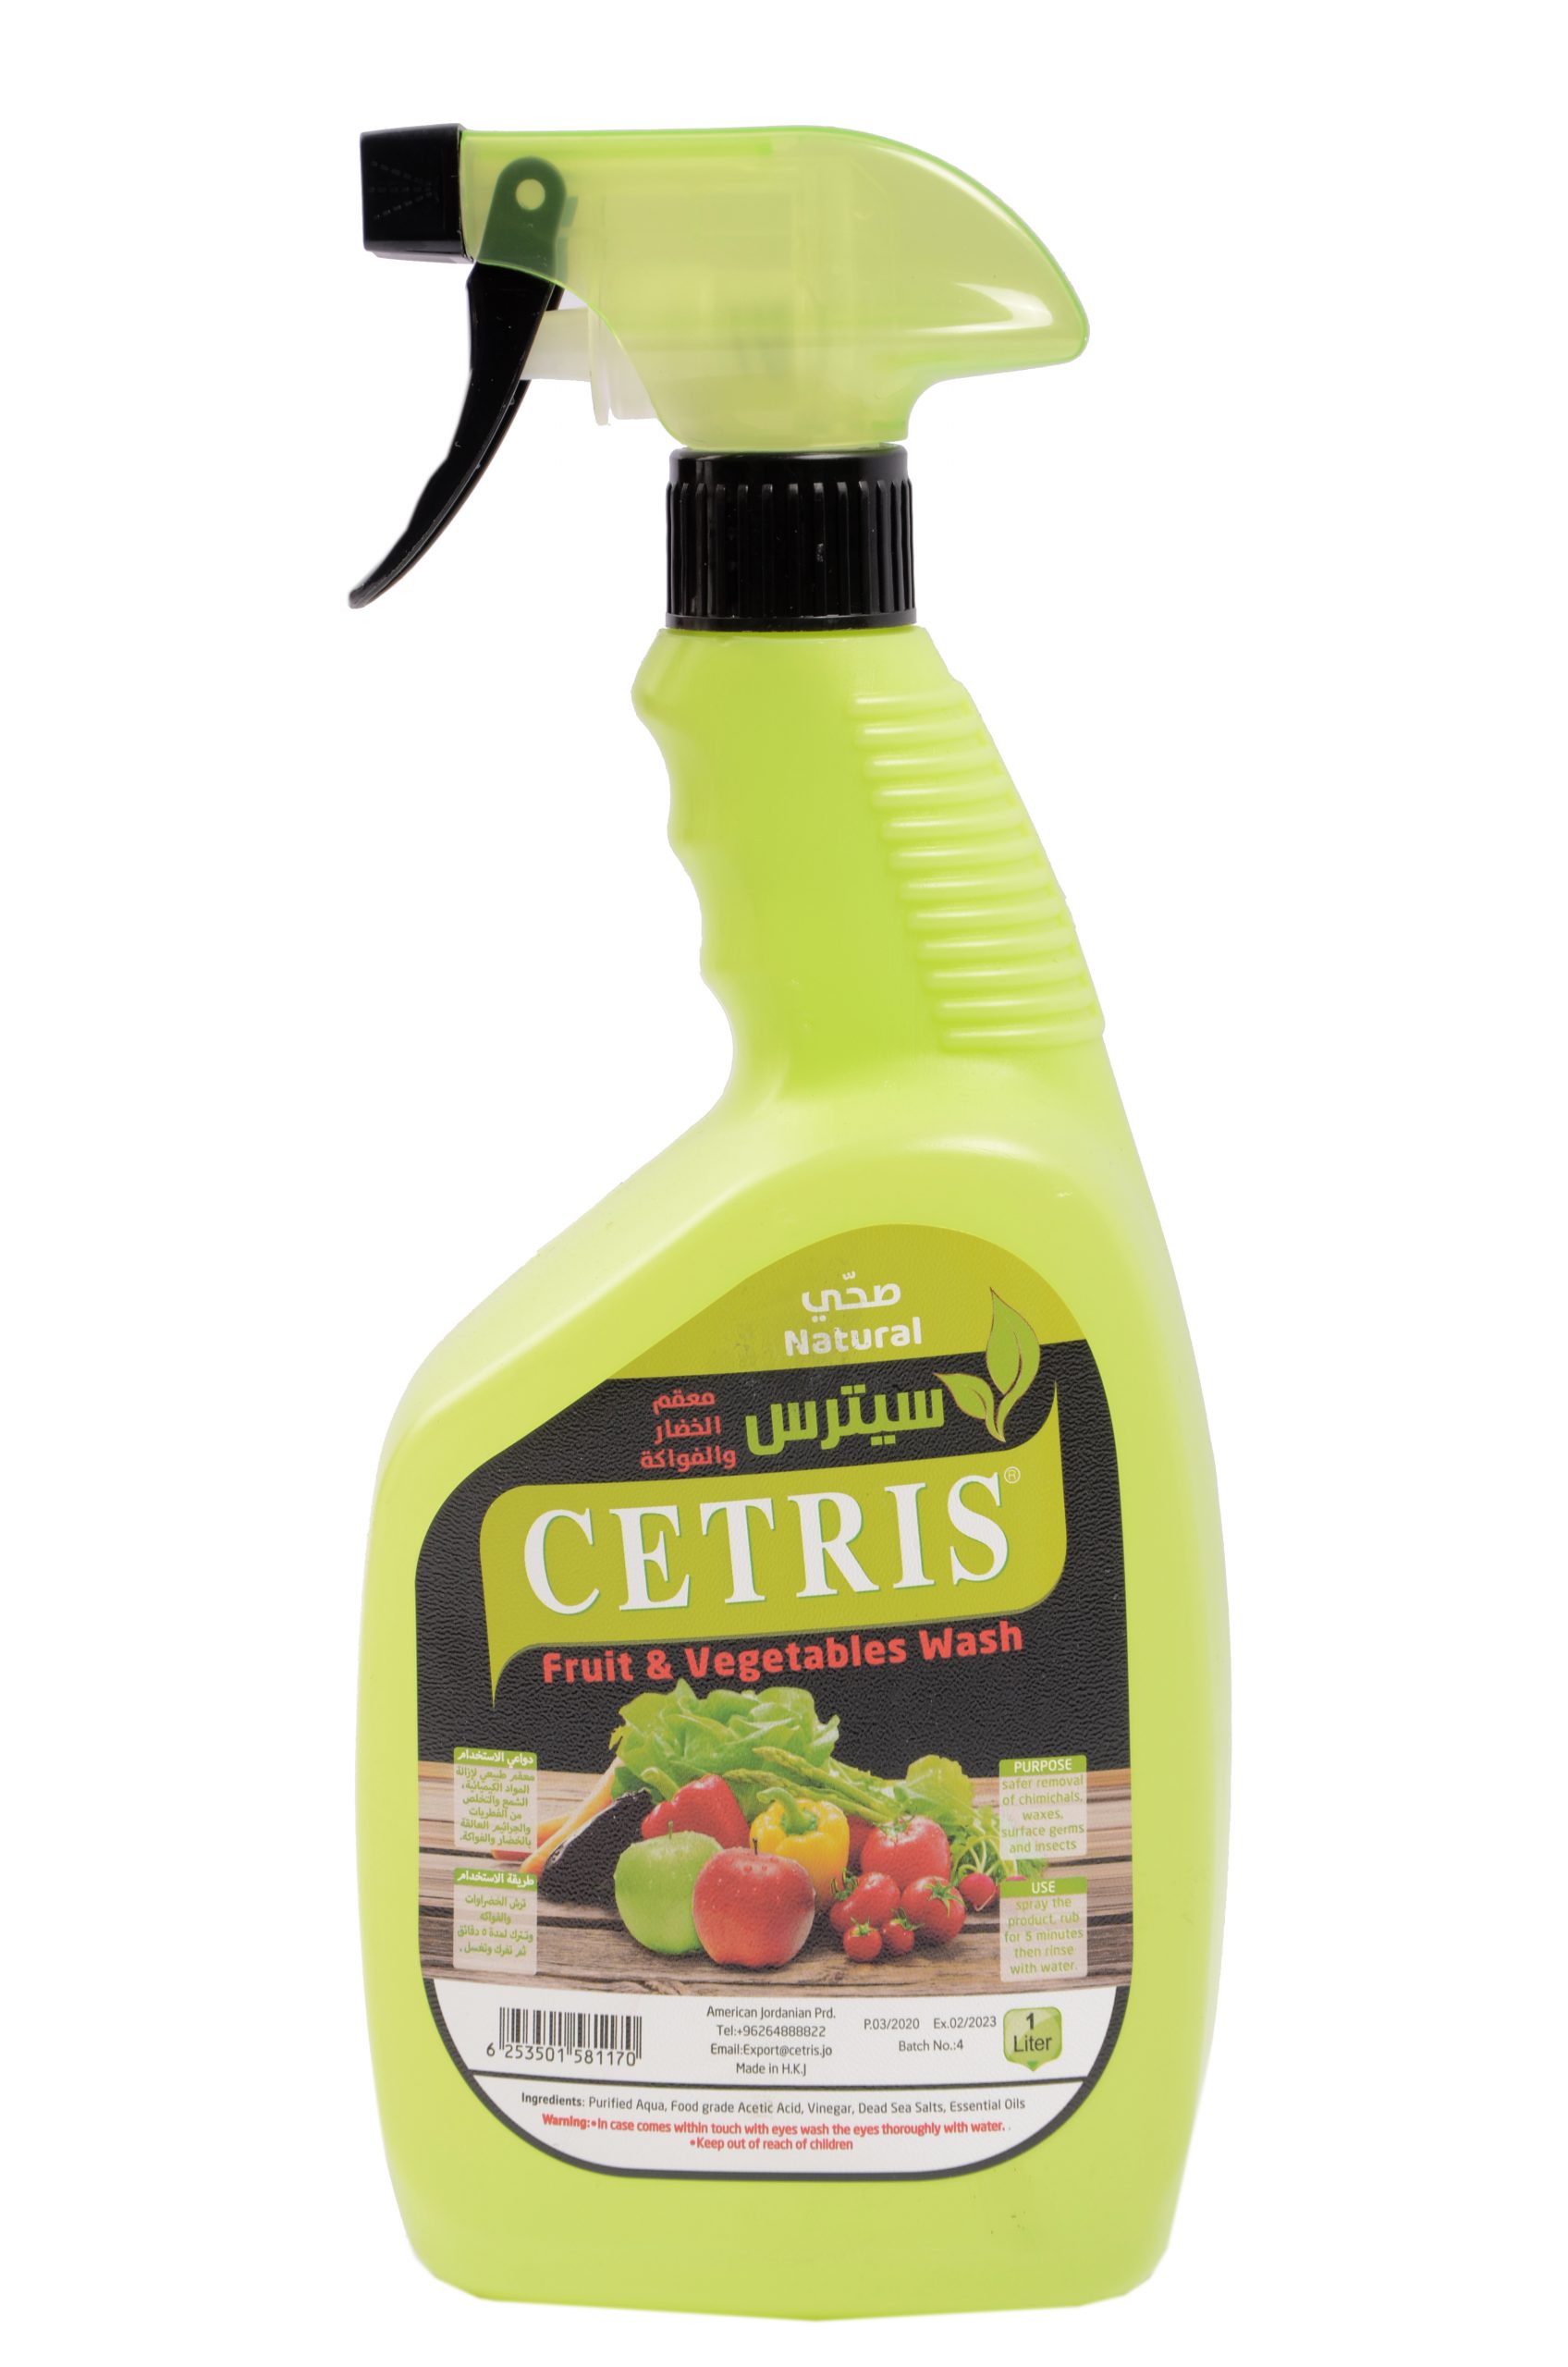 Cetris 
	
	Fruits & Vegetables Wash
	 |  Detergents & Cleaners |  Cleaning Materials |  House Ware